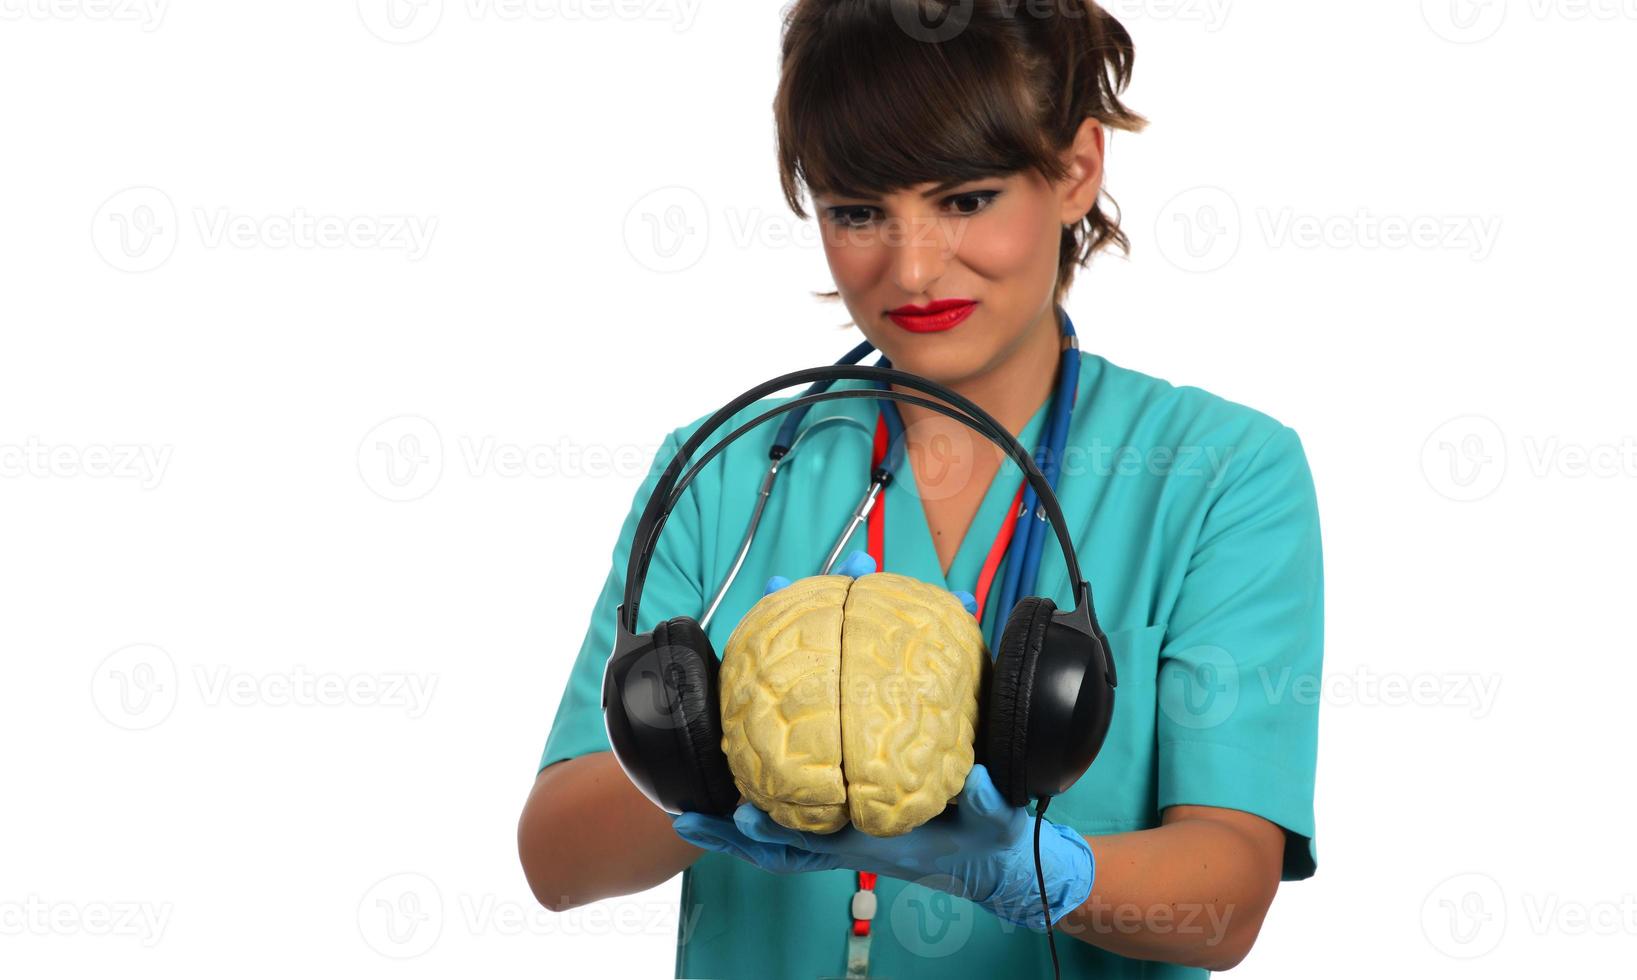 Female doctor holding a human brain model against white background photo